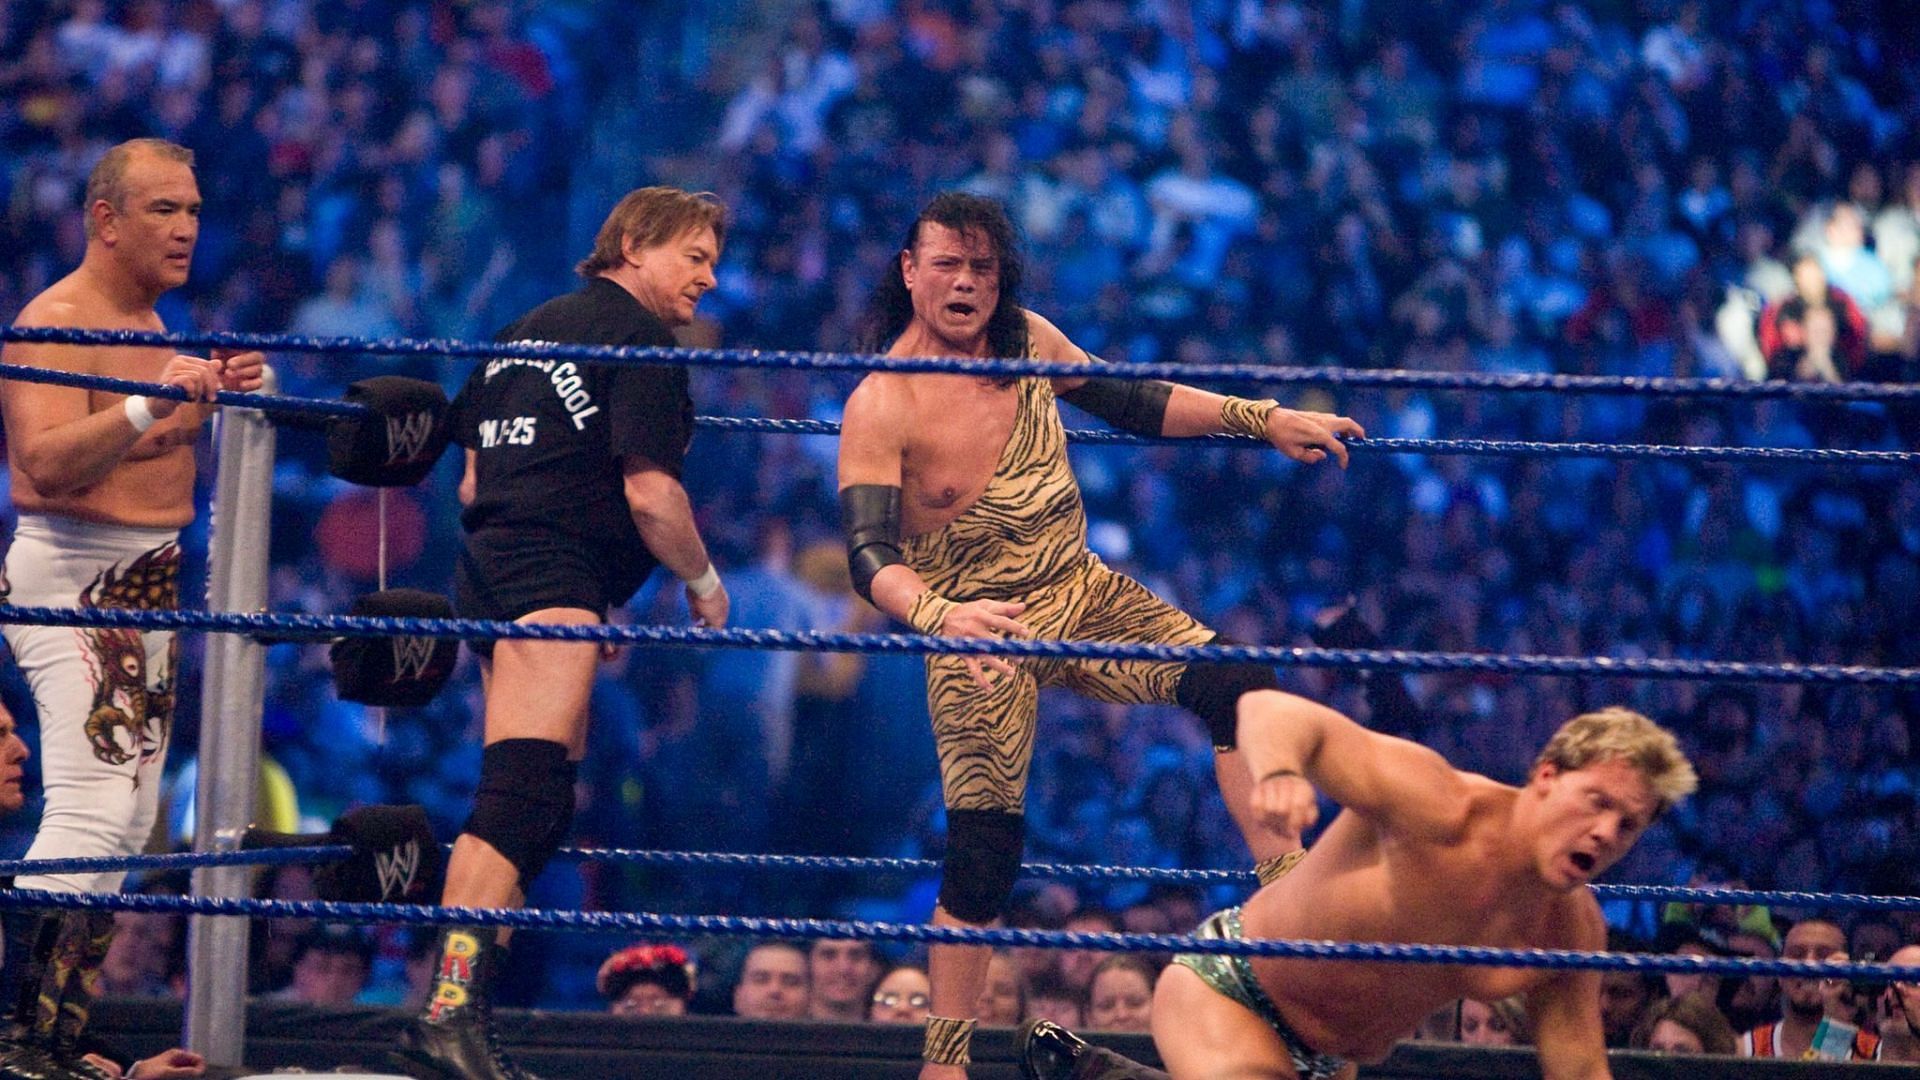 The three legends faced Chris Jericho in a handicap match at WrestleMania 25